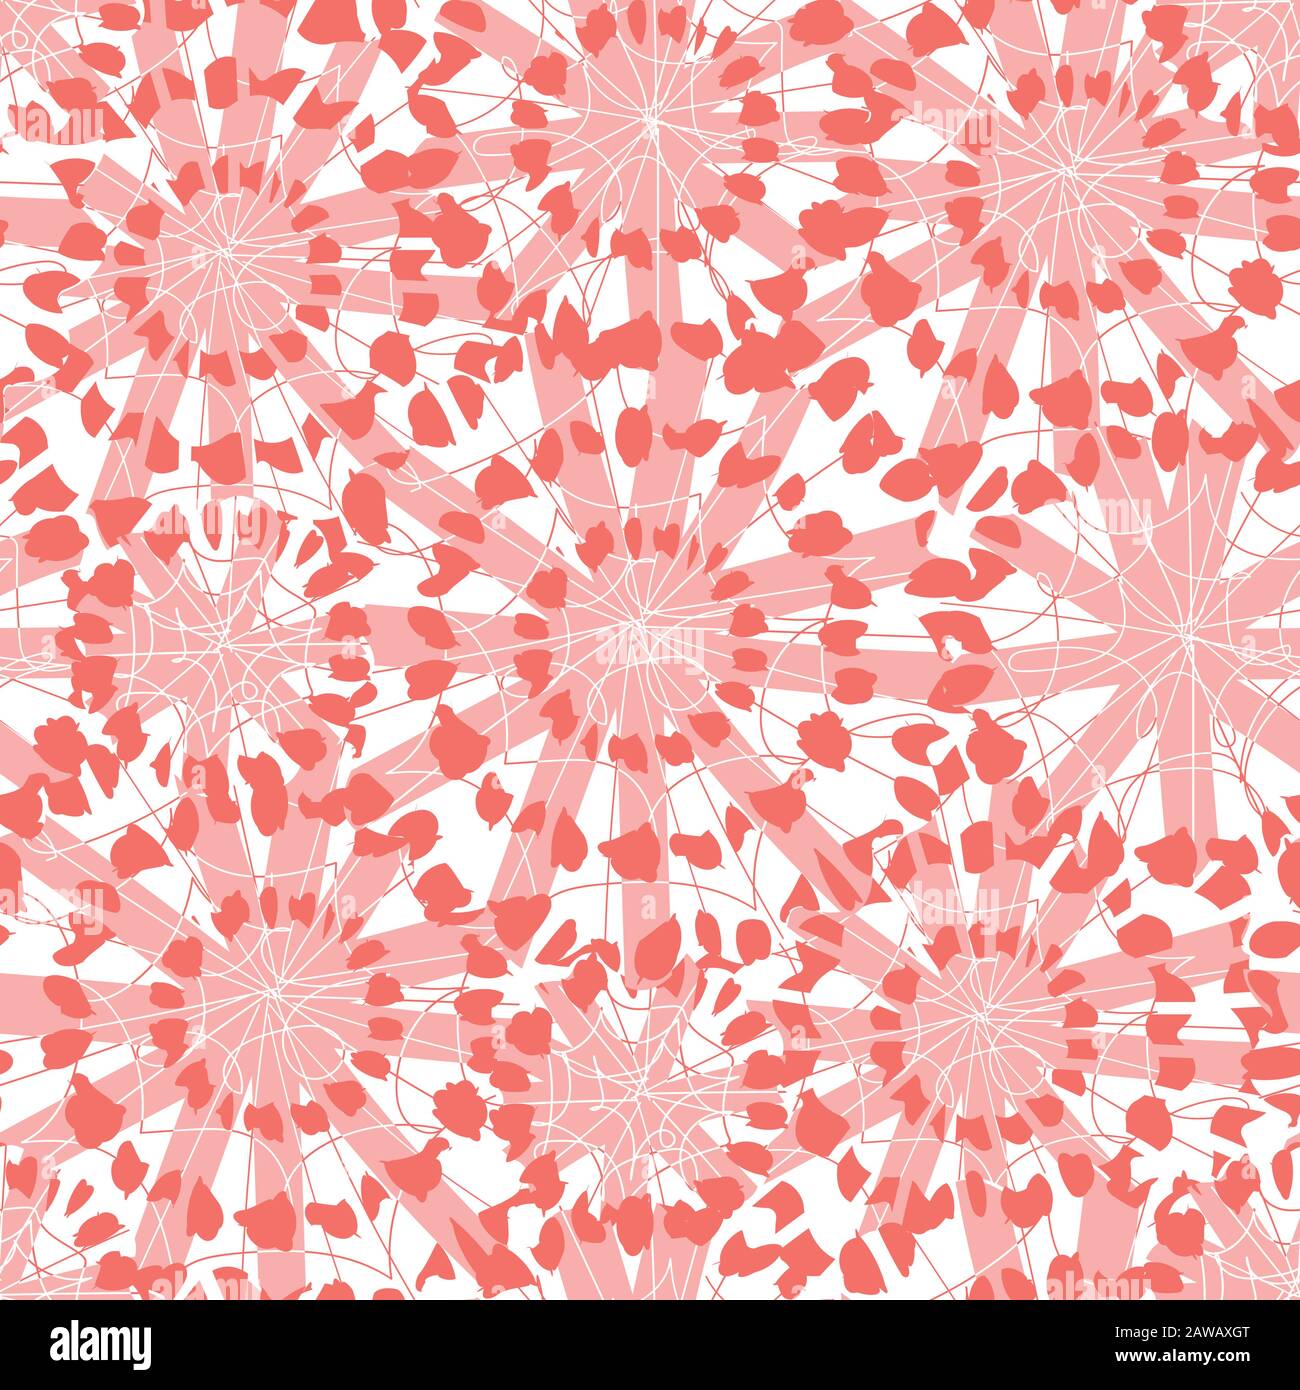 Vector coral pink abstract floral shibori circles 02 overlap pattern. Suitable for textile, gift wrap and wallpaper. Stock Vector